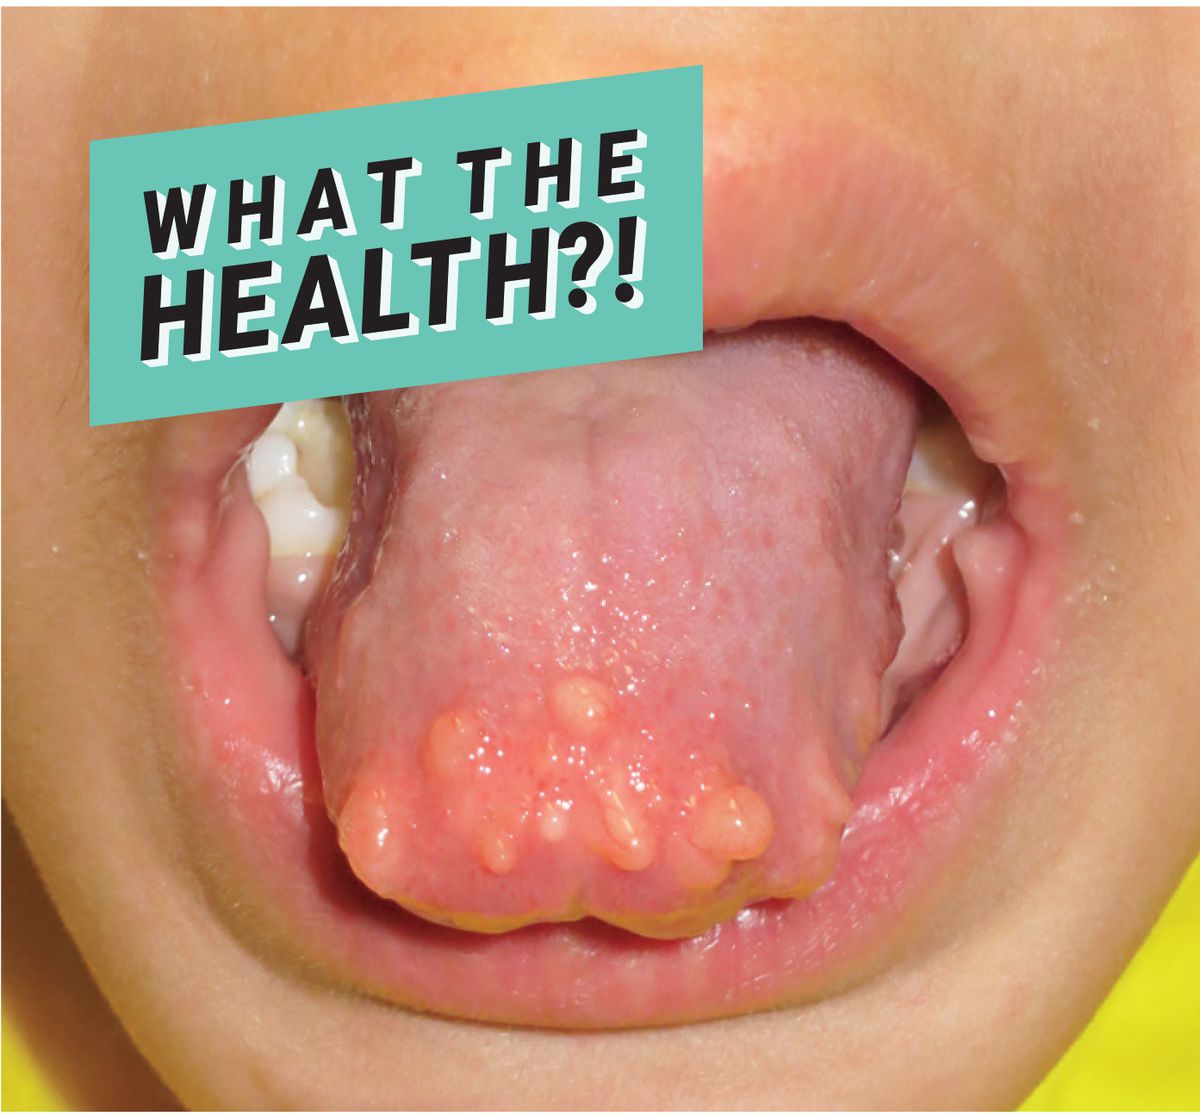 health tongue infection virus condition